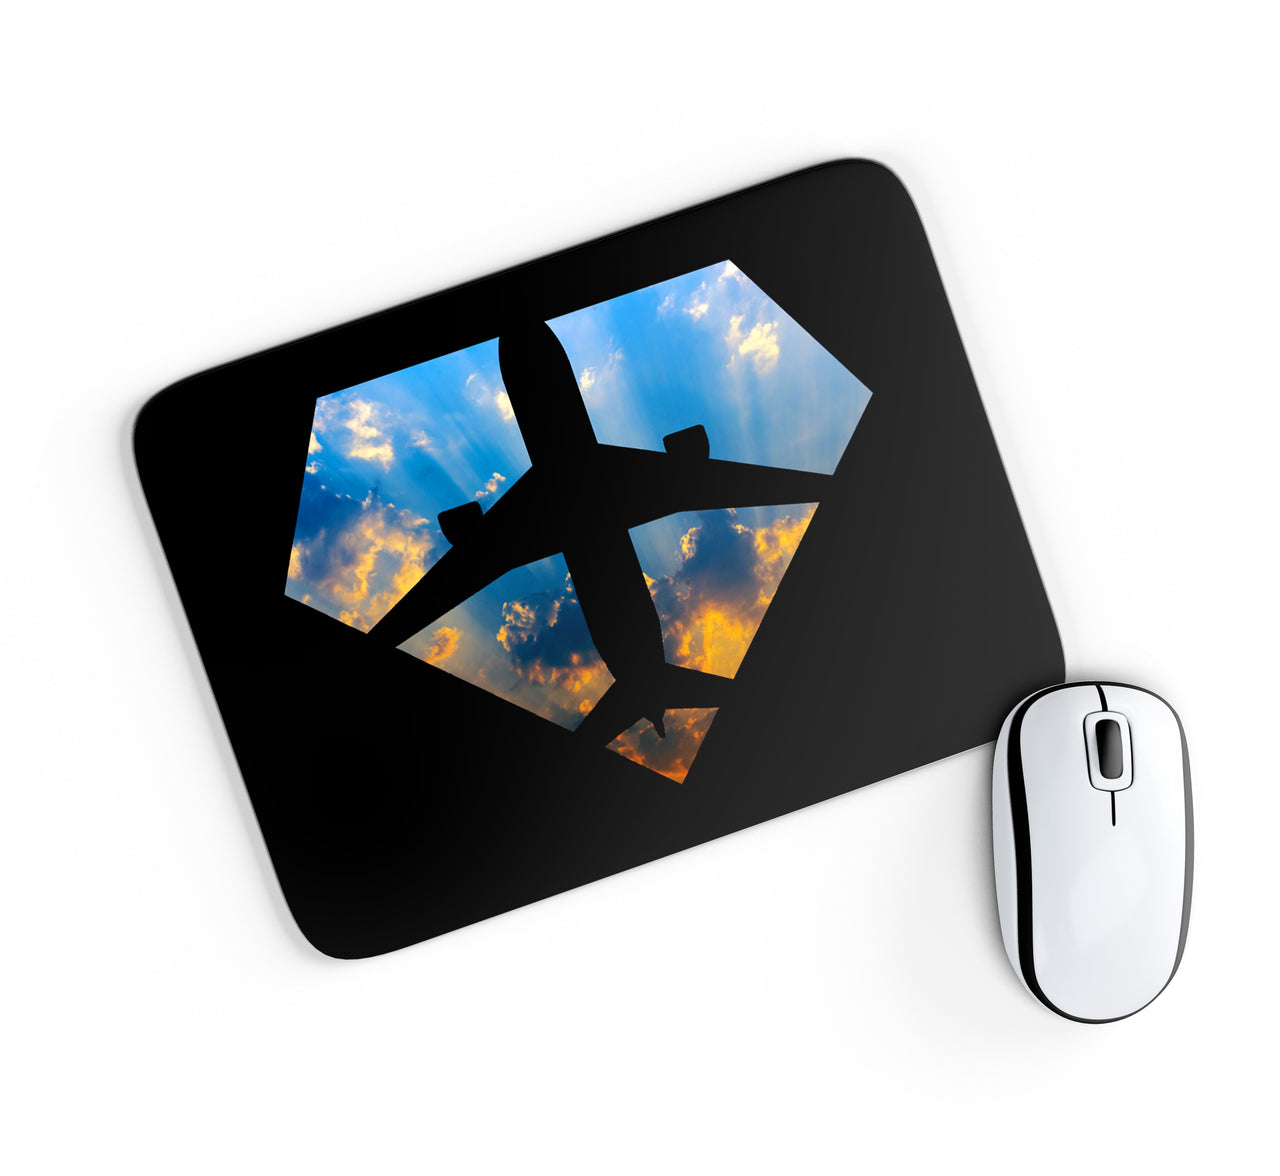 Supermen of The Skies (Sunrise) Designed Mouse Pads